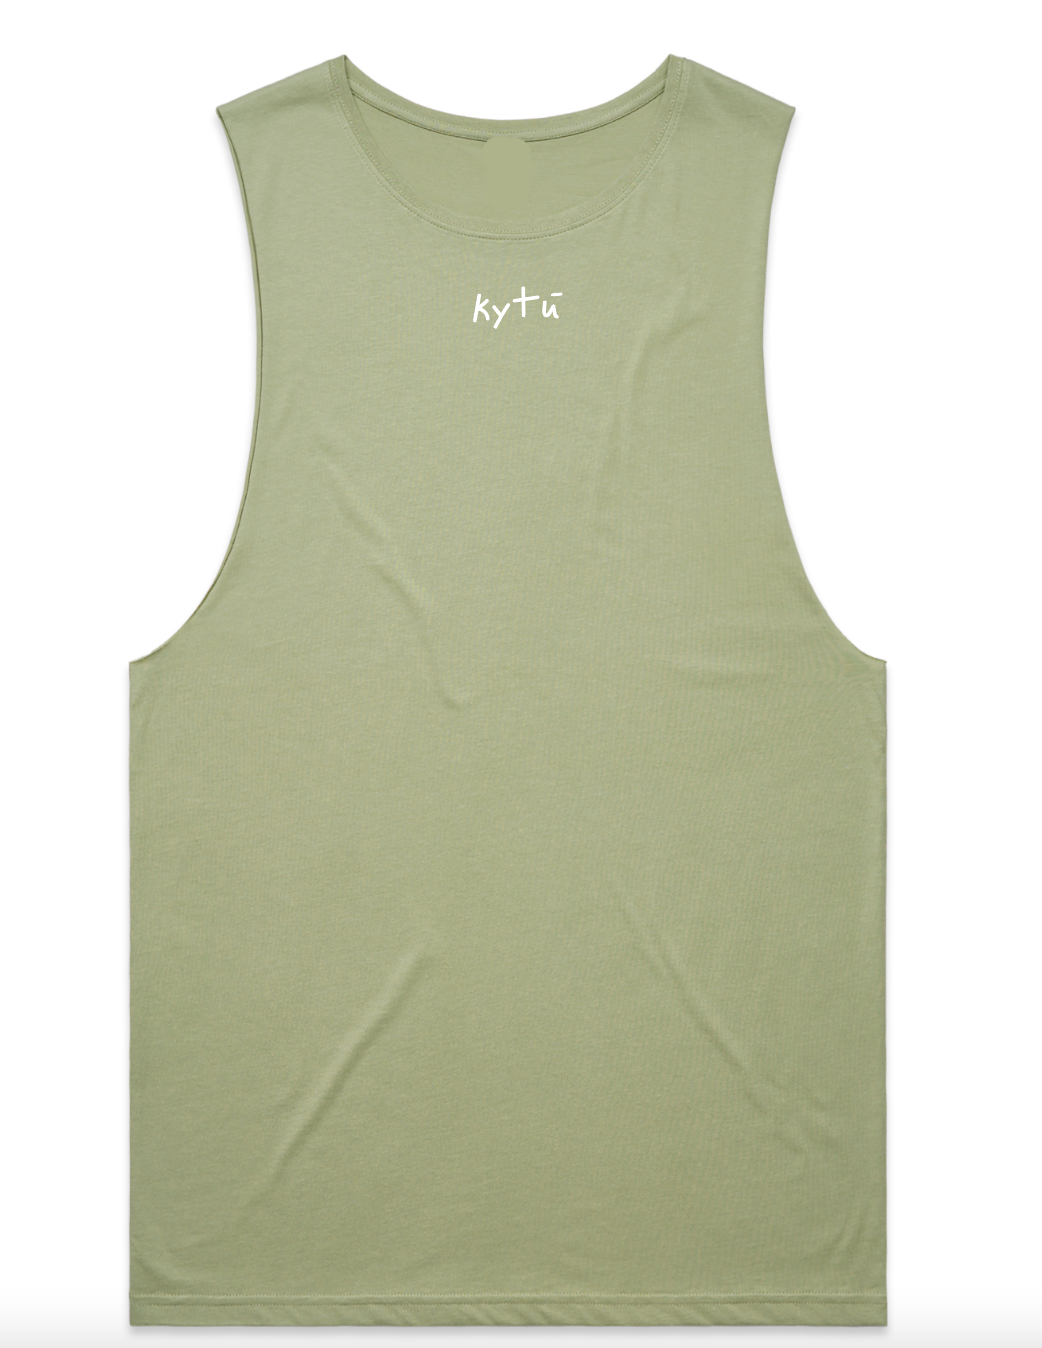 Passion/Everything Raw Edge Cut Off Tank